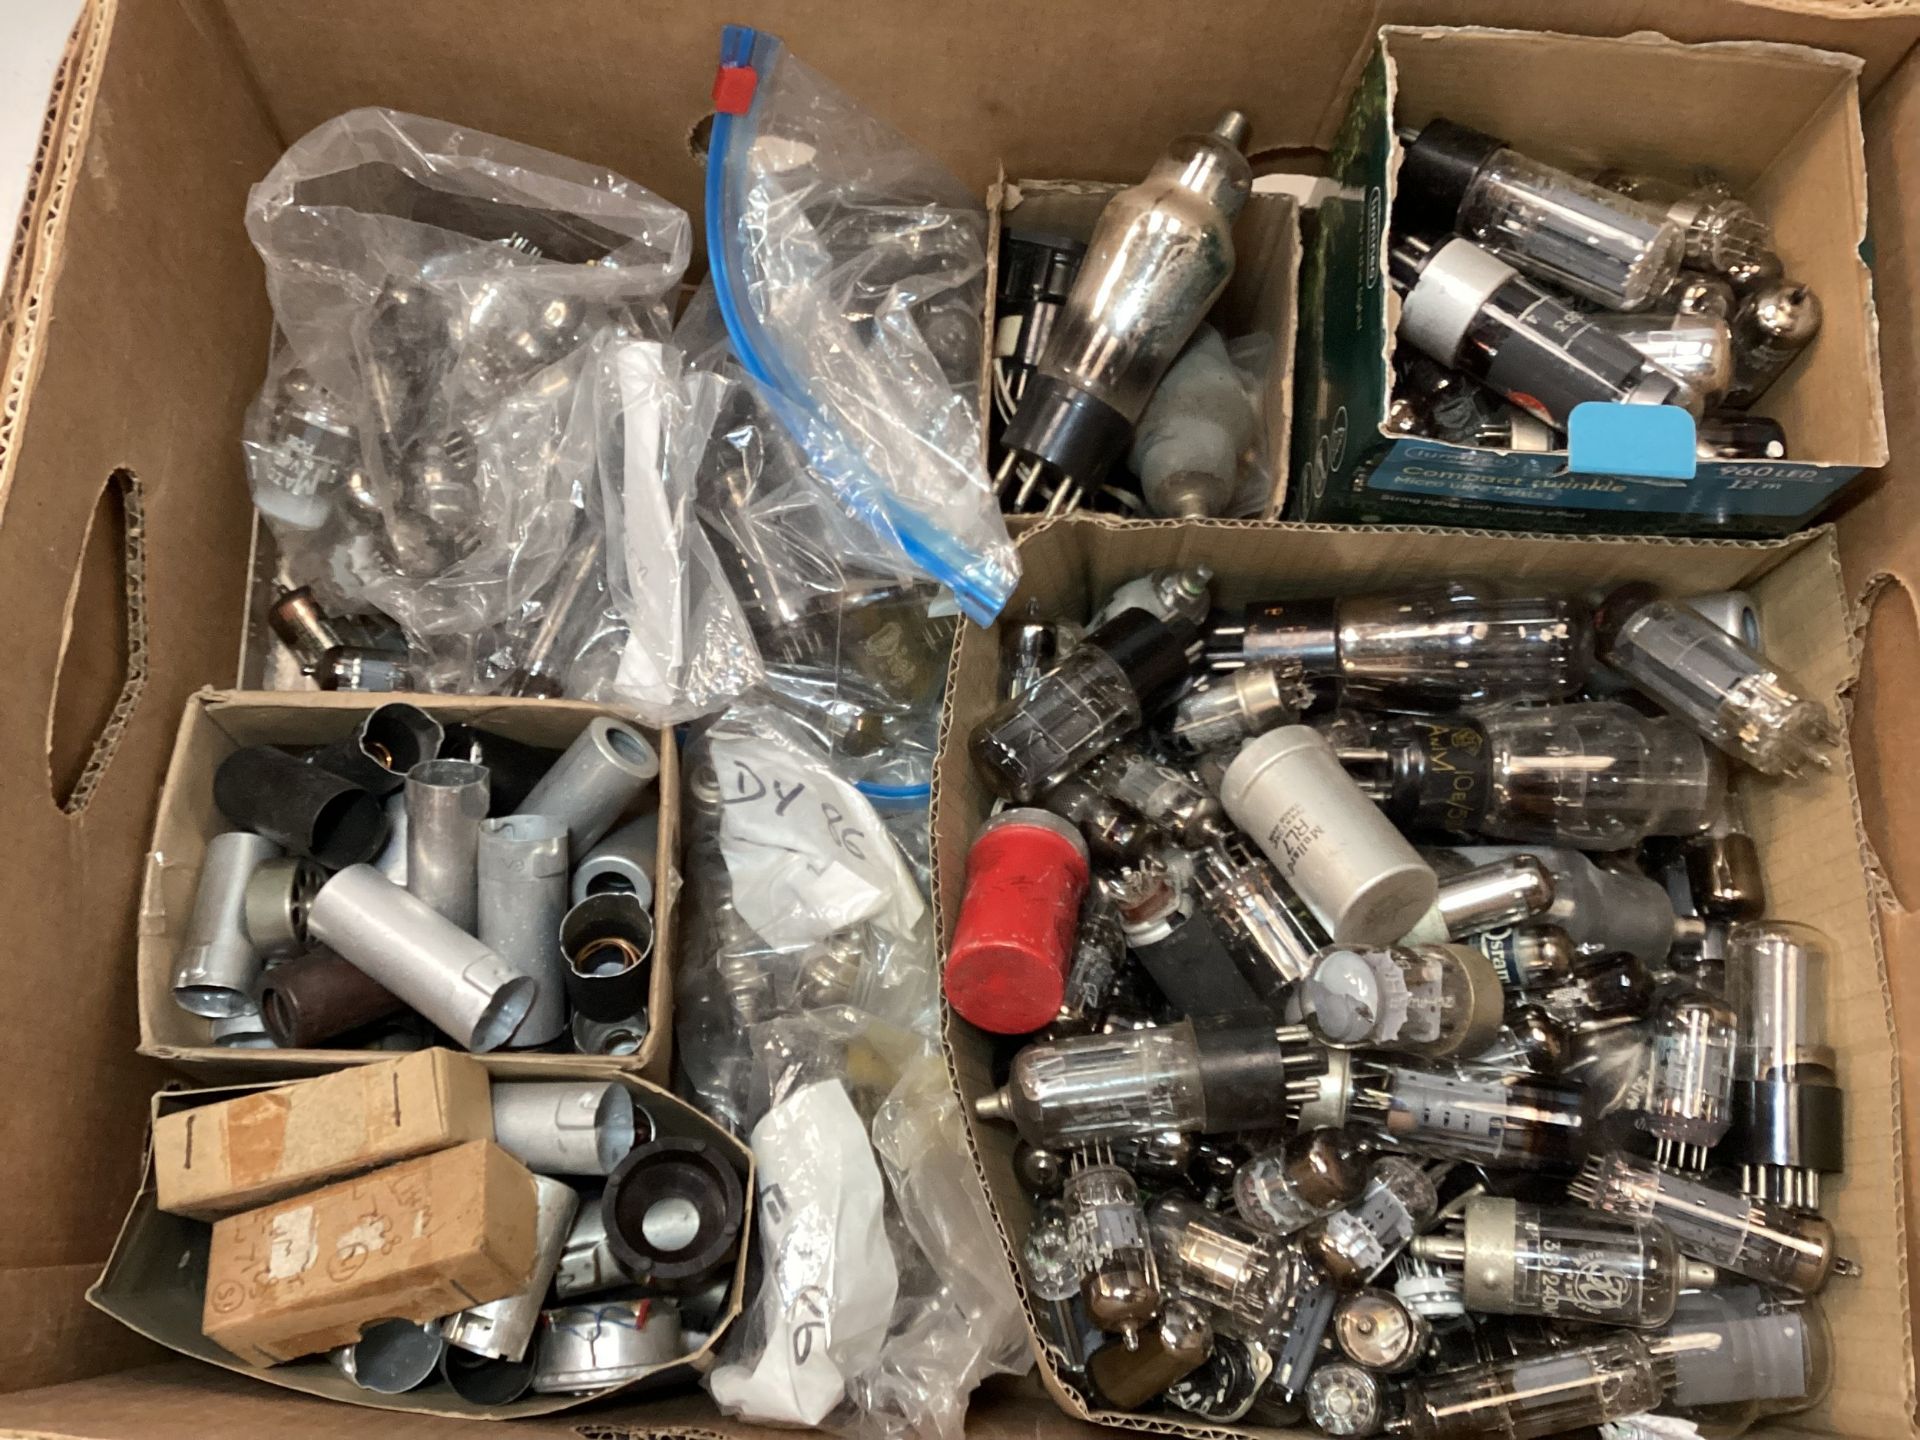 LARGE BOX OF VARIOUS VALVES. A very mixed selection of used valves found here in various conditions.